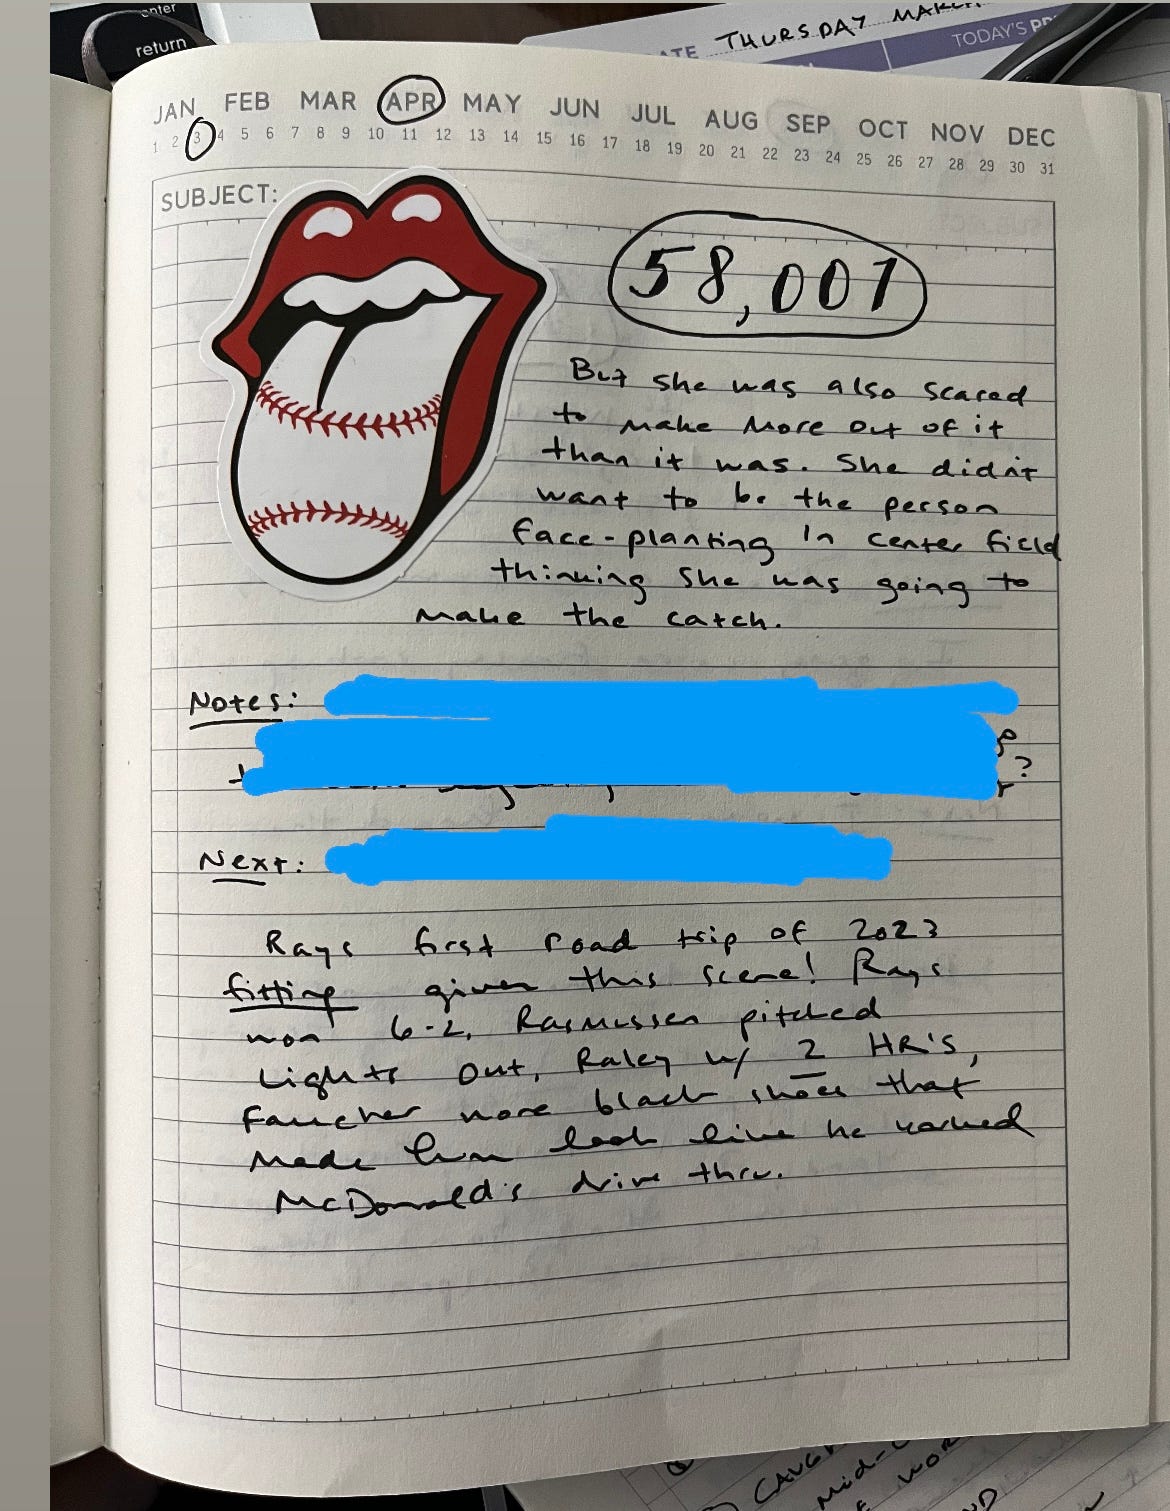 Page from notebook with date April 3 circled, featuring a sticker that's the Rolling Stones stuck-out tongue logo where the tongue is a styled like a baseball, and then the text included below with some parts redacted.